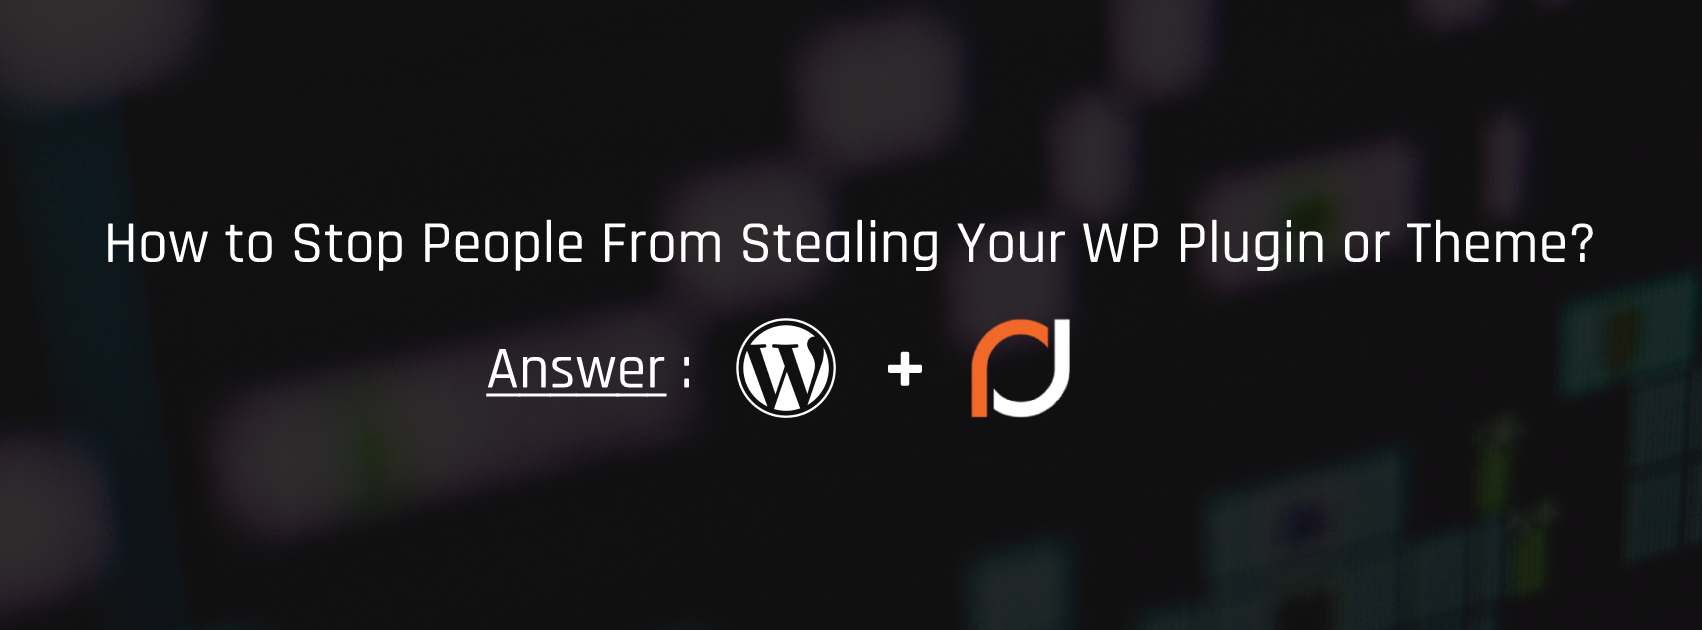 Stop People From Stealing Your Work: Implement WordPress Plugin/Theme Licensing